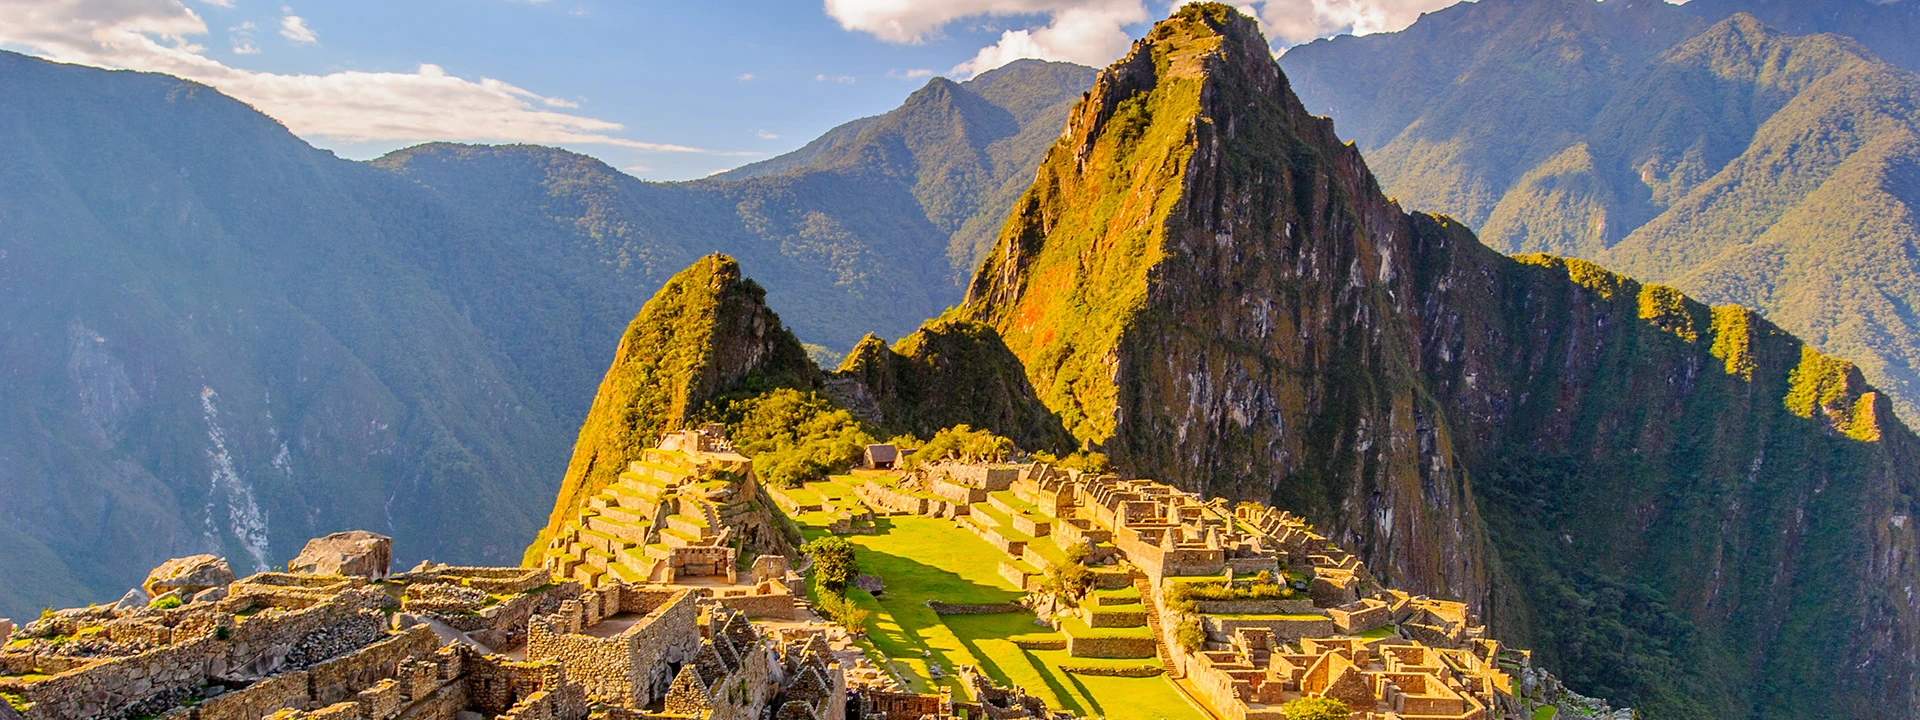 Machu Picchu ancient world wonder at sunset during a cruise of South America